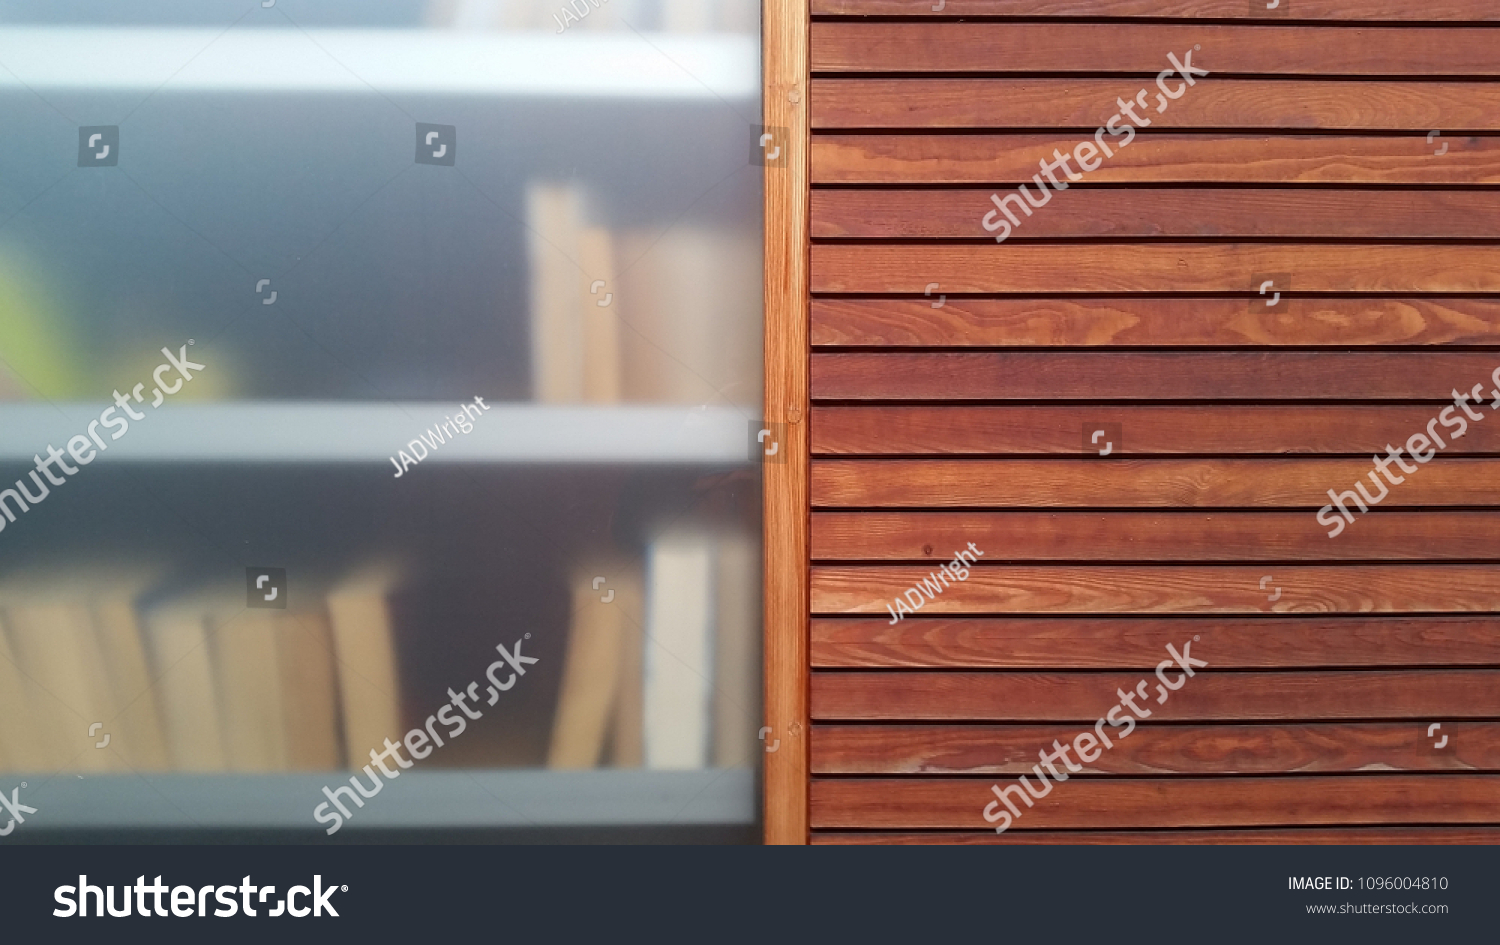 Modern Book Cabinet Royalty Free Stock Image